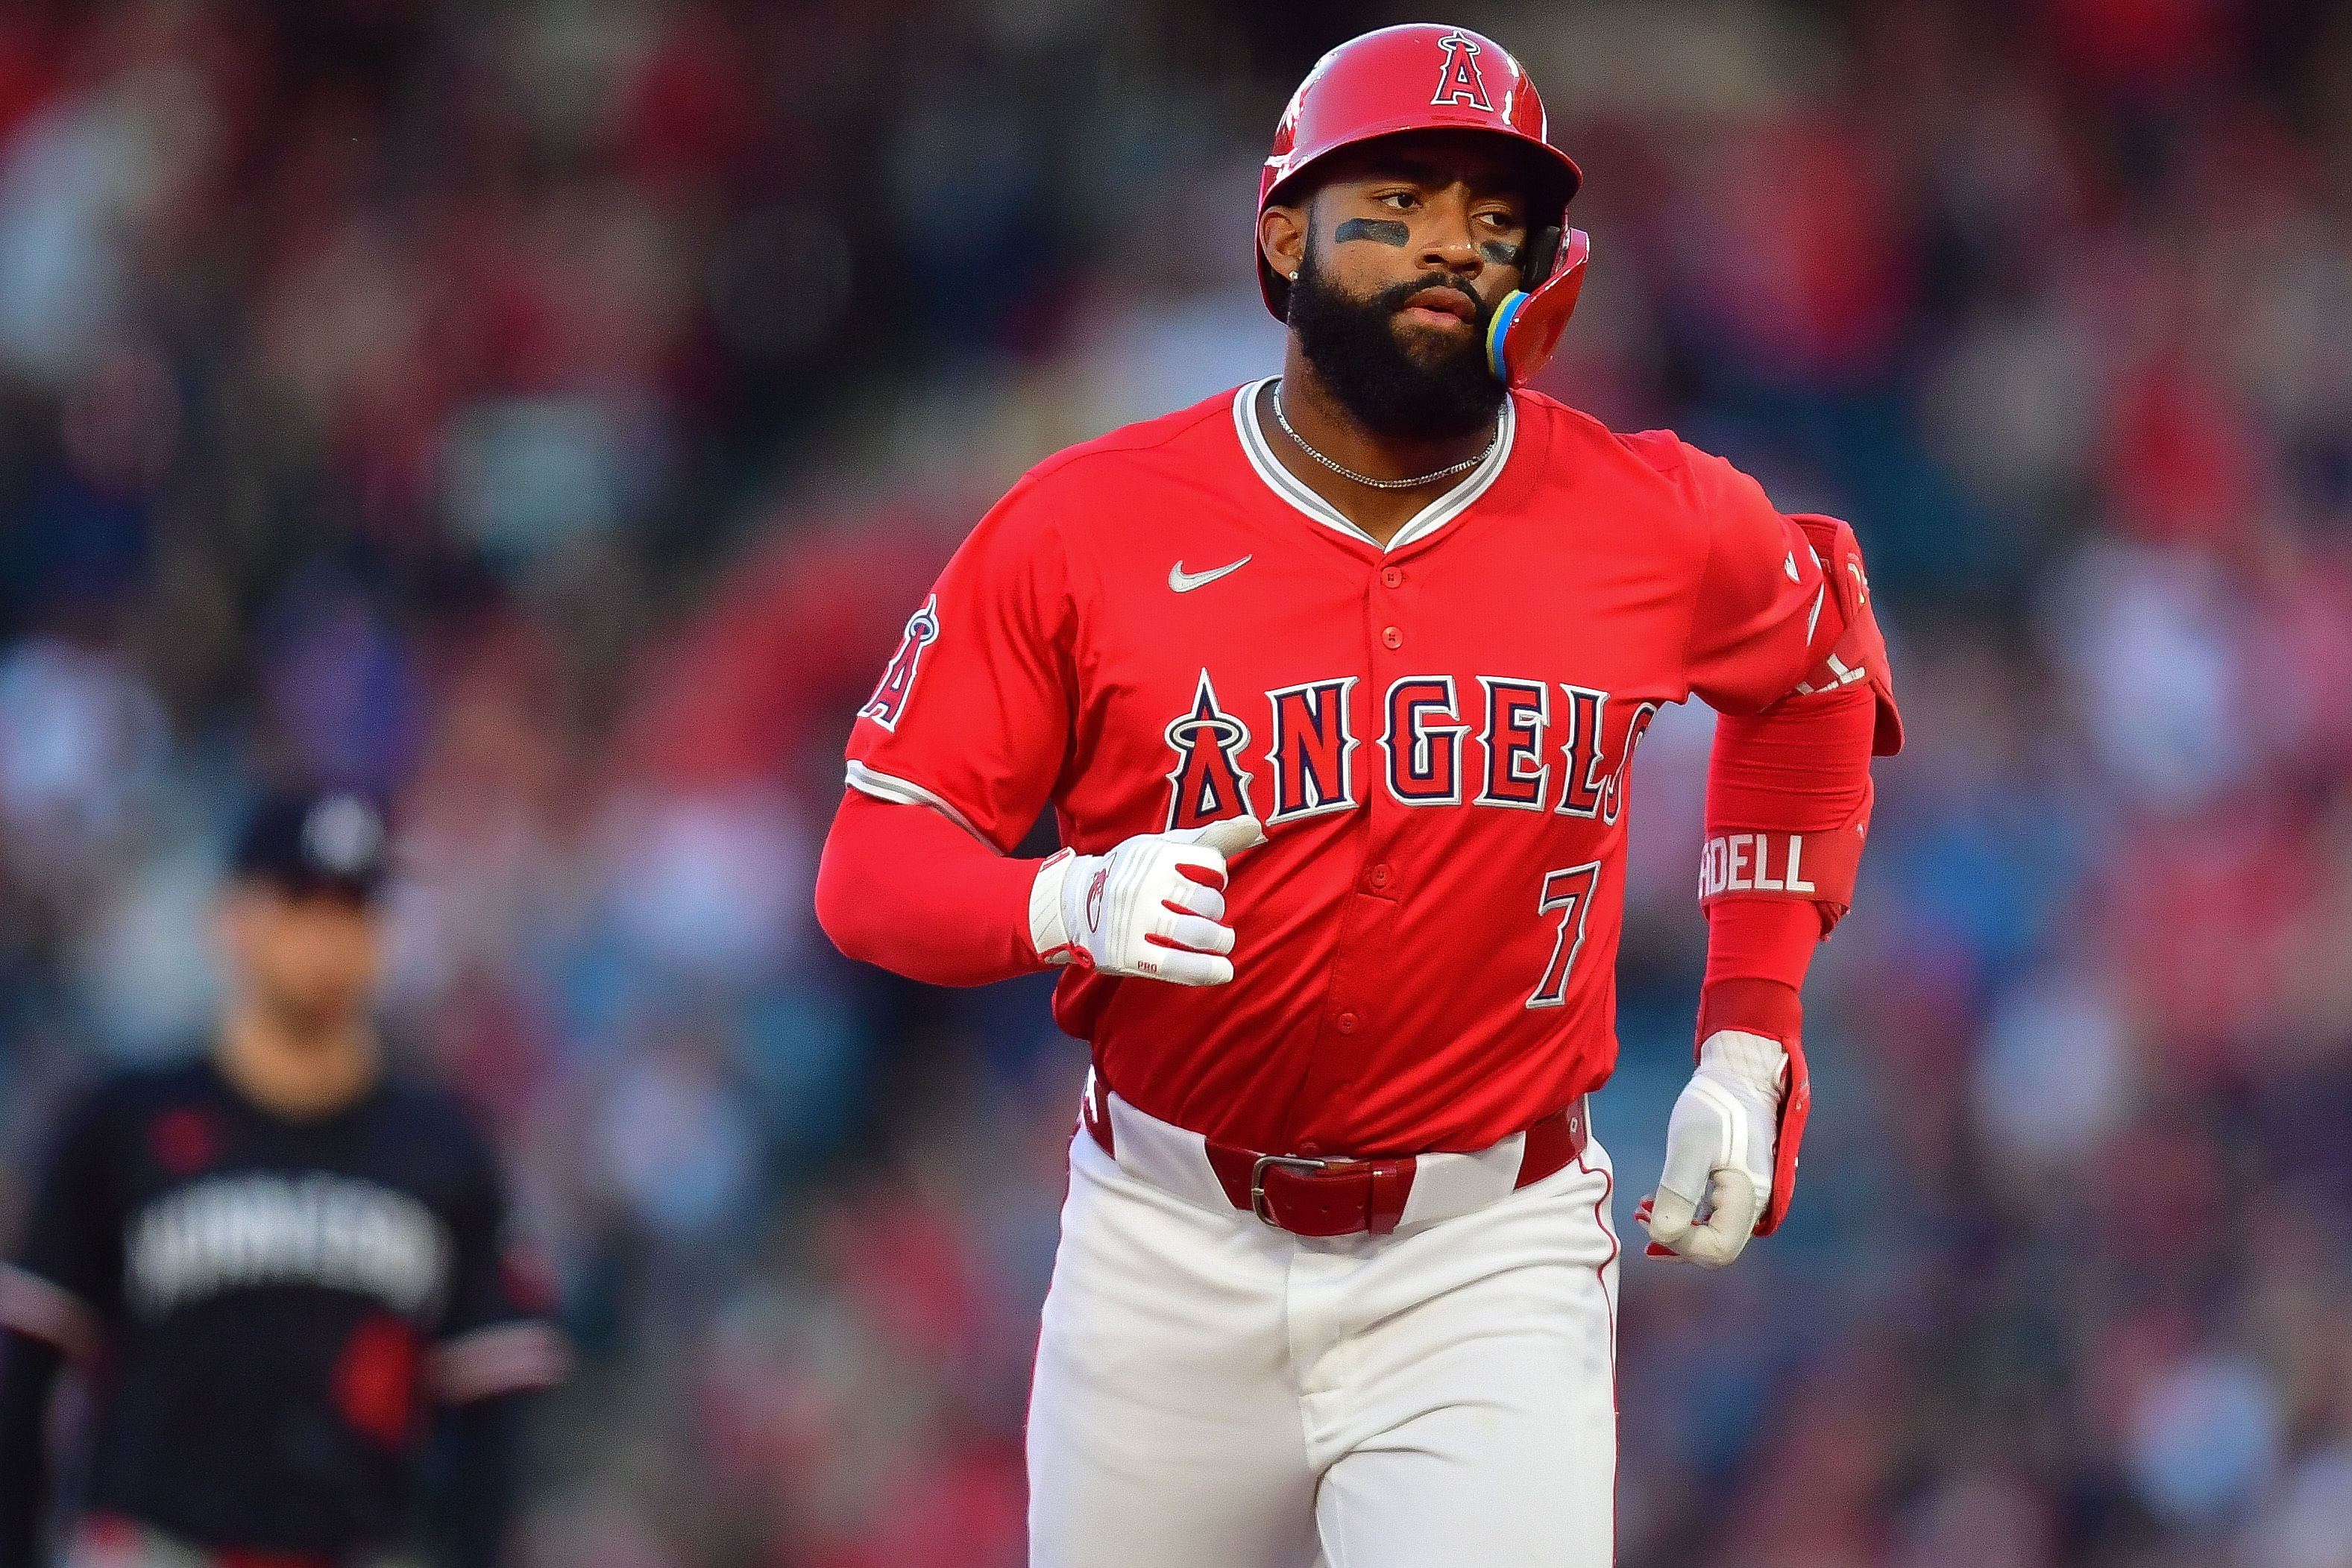 Jo Adell has played left field for the Angels